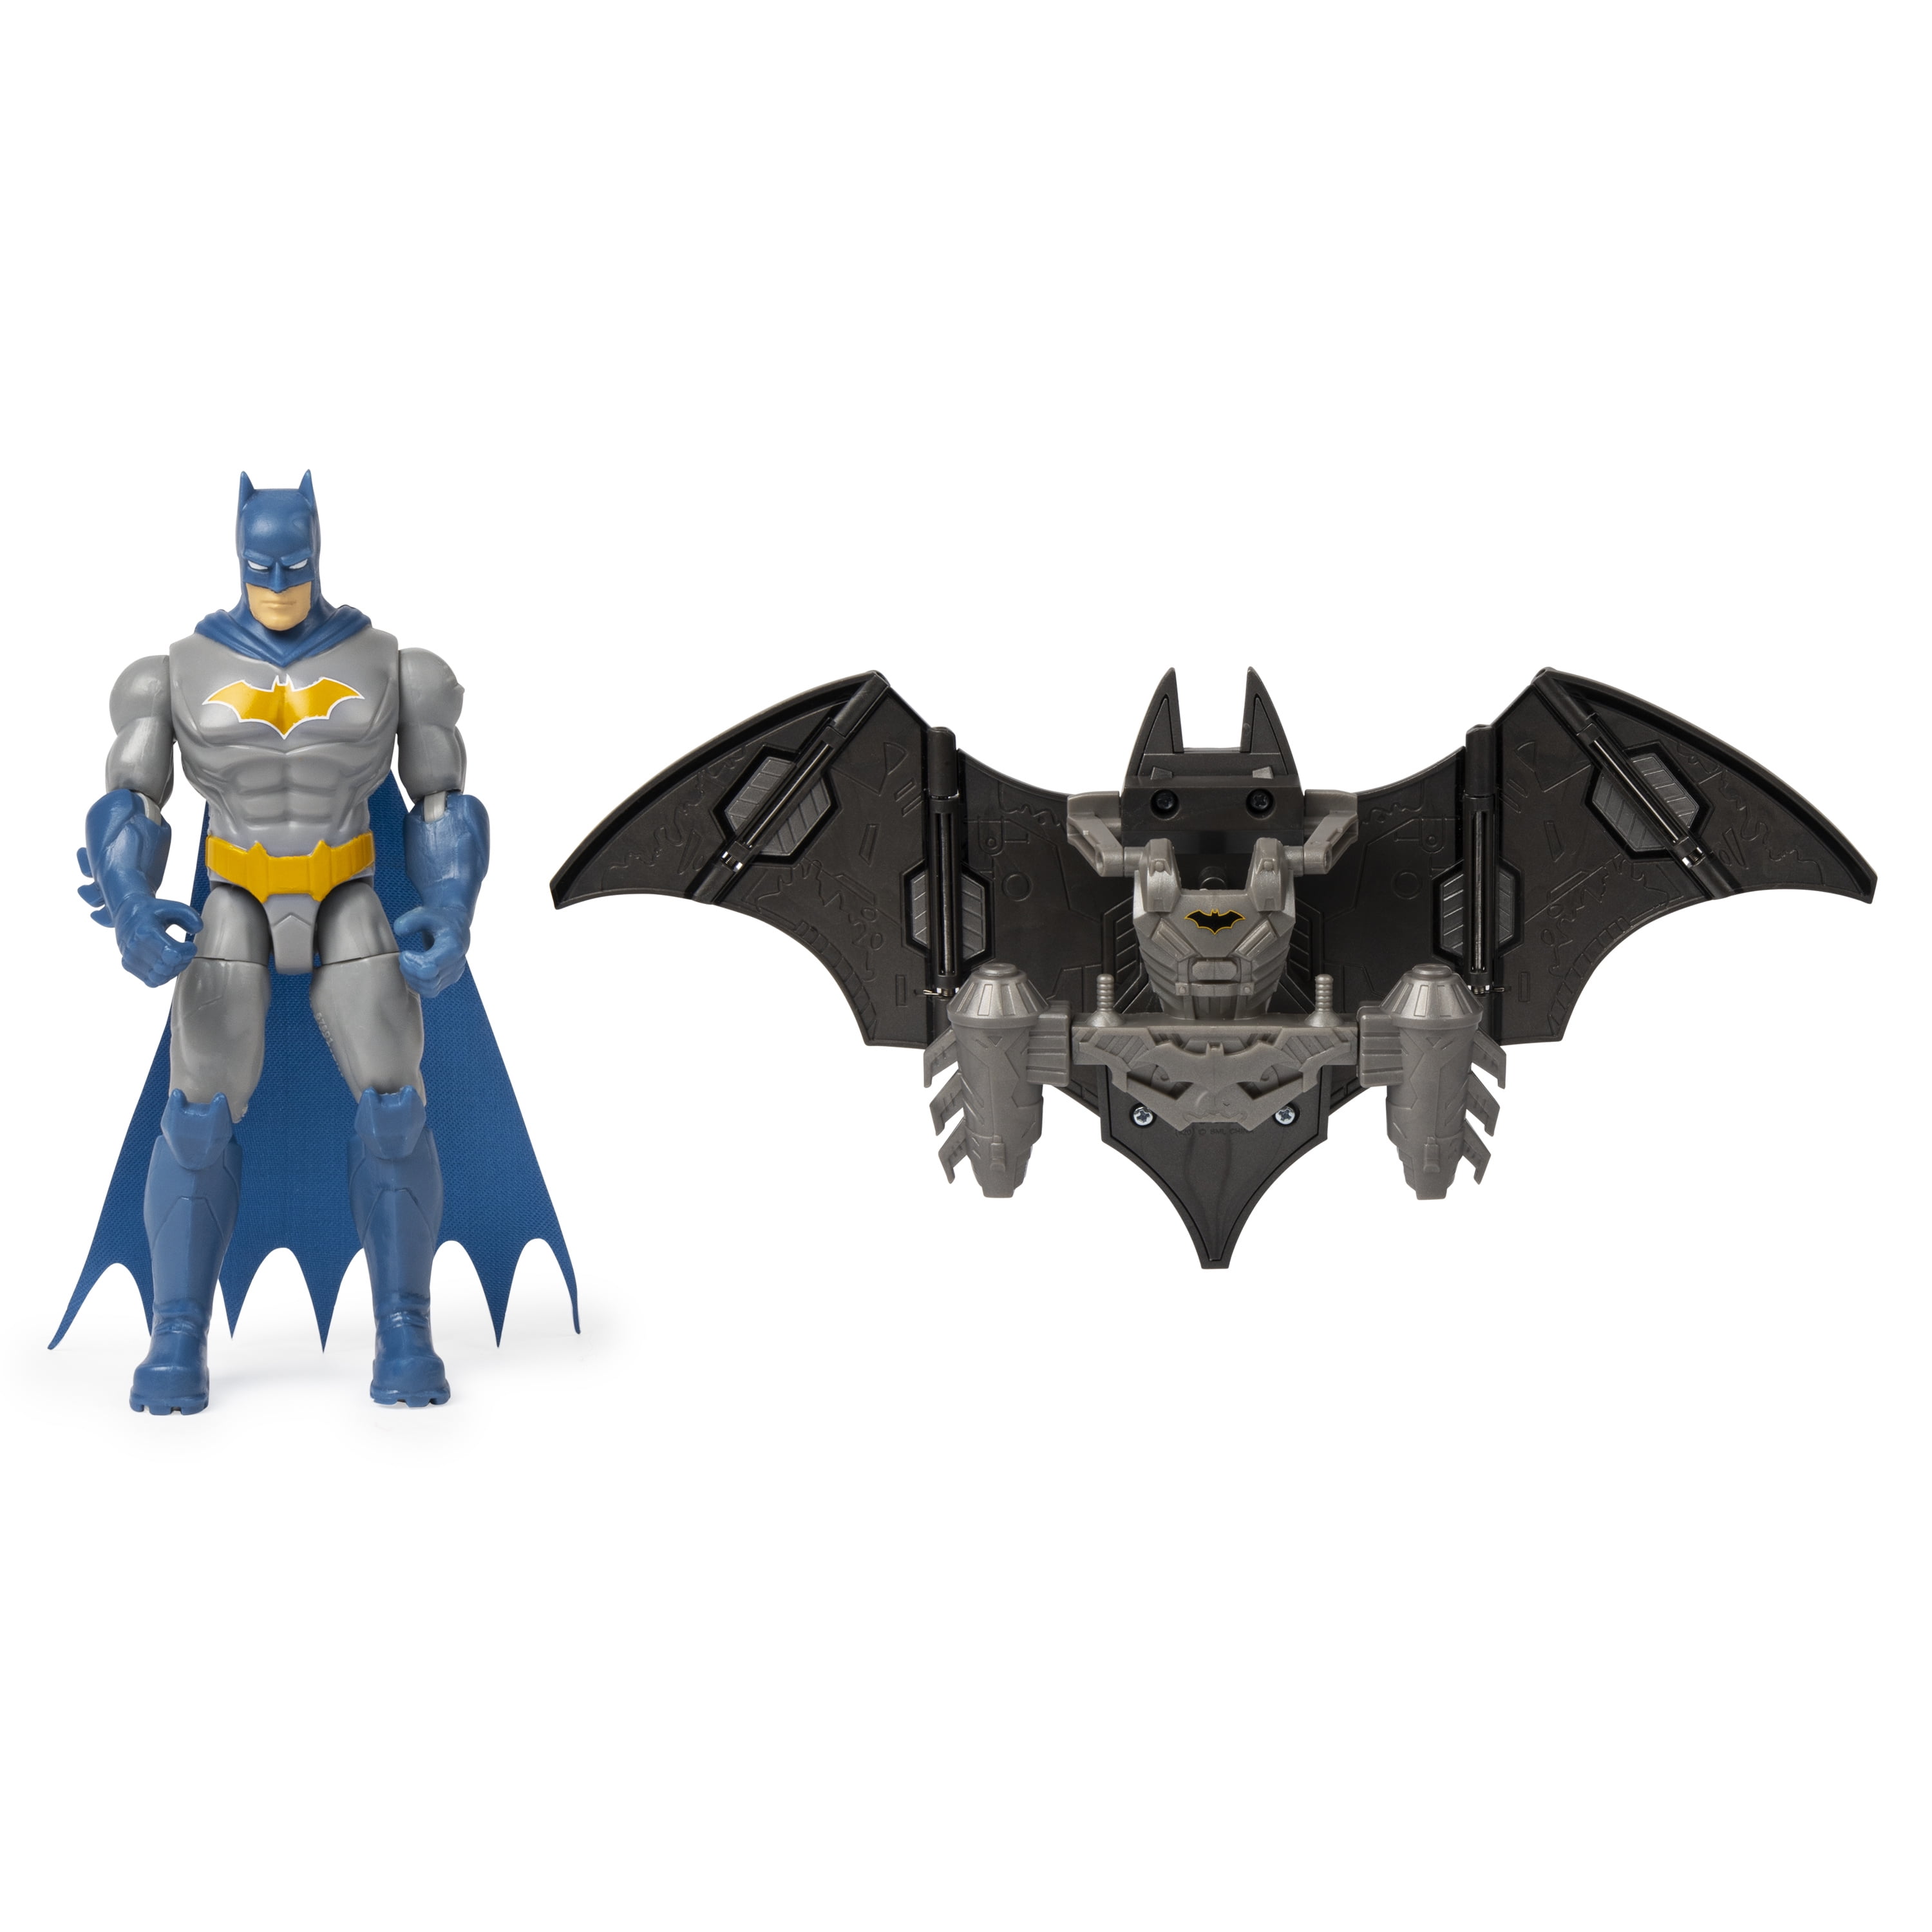 DC Comics Batman Bat-Tech 4-inch Deluxe Action Figure with Transforming Tech Armor Kids Toys for Boys Aged 4 and up